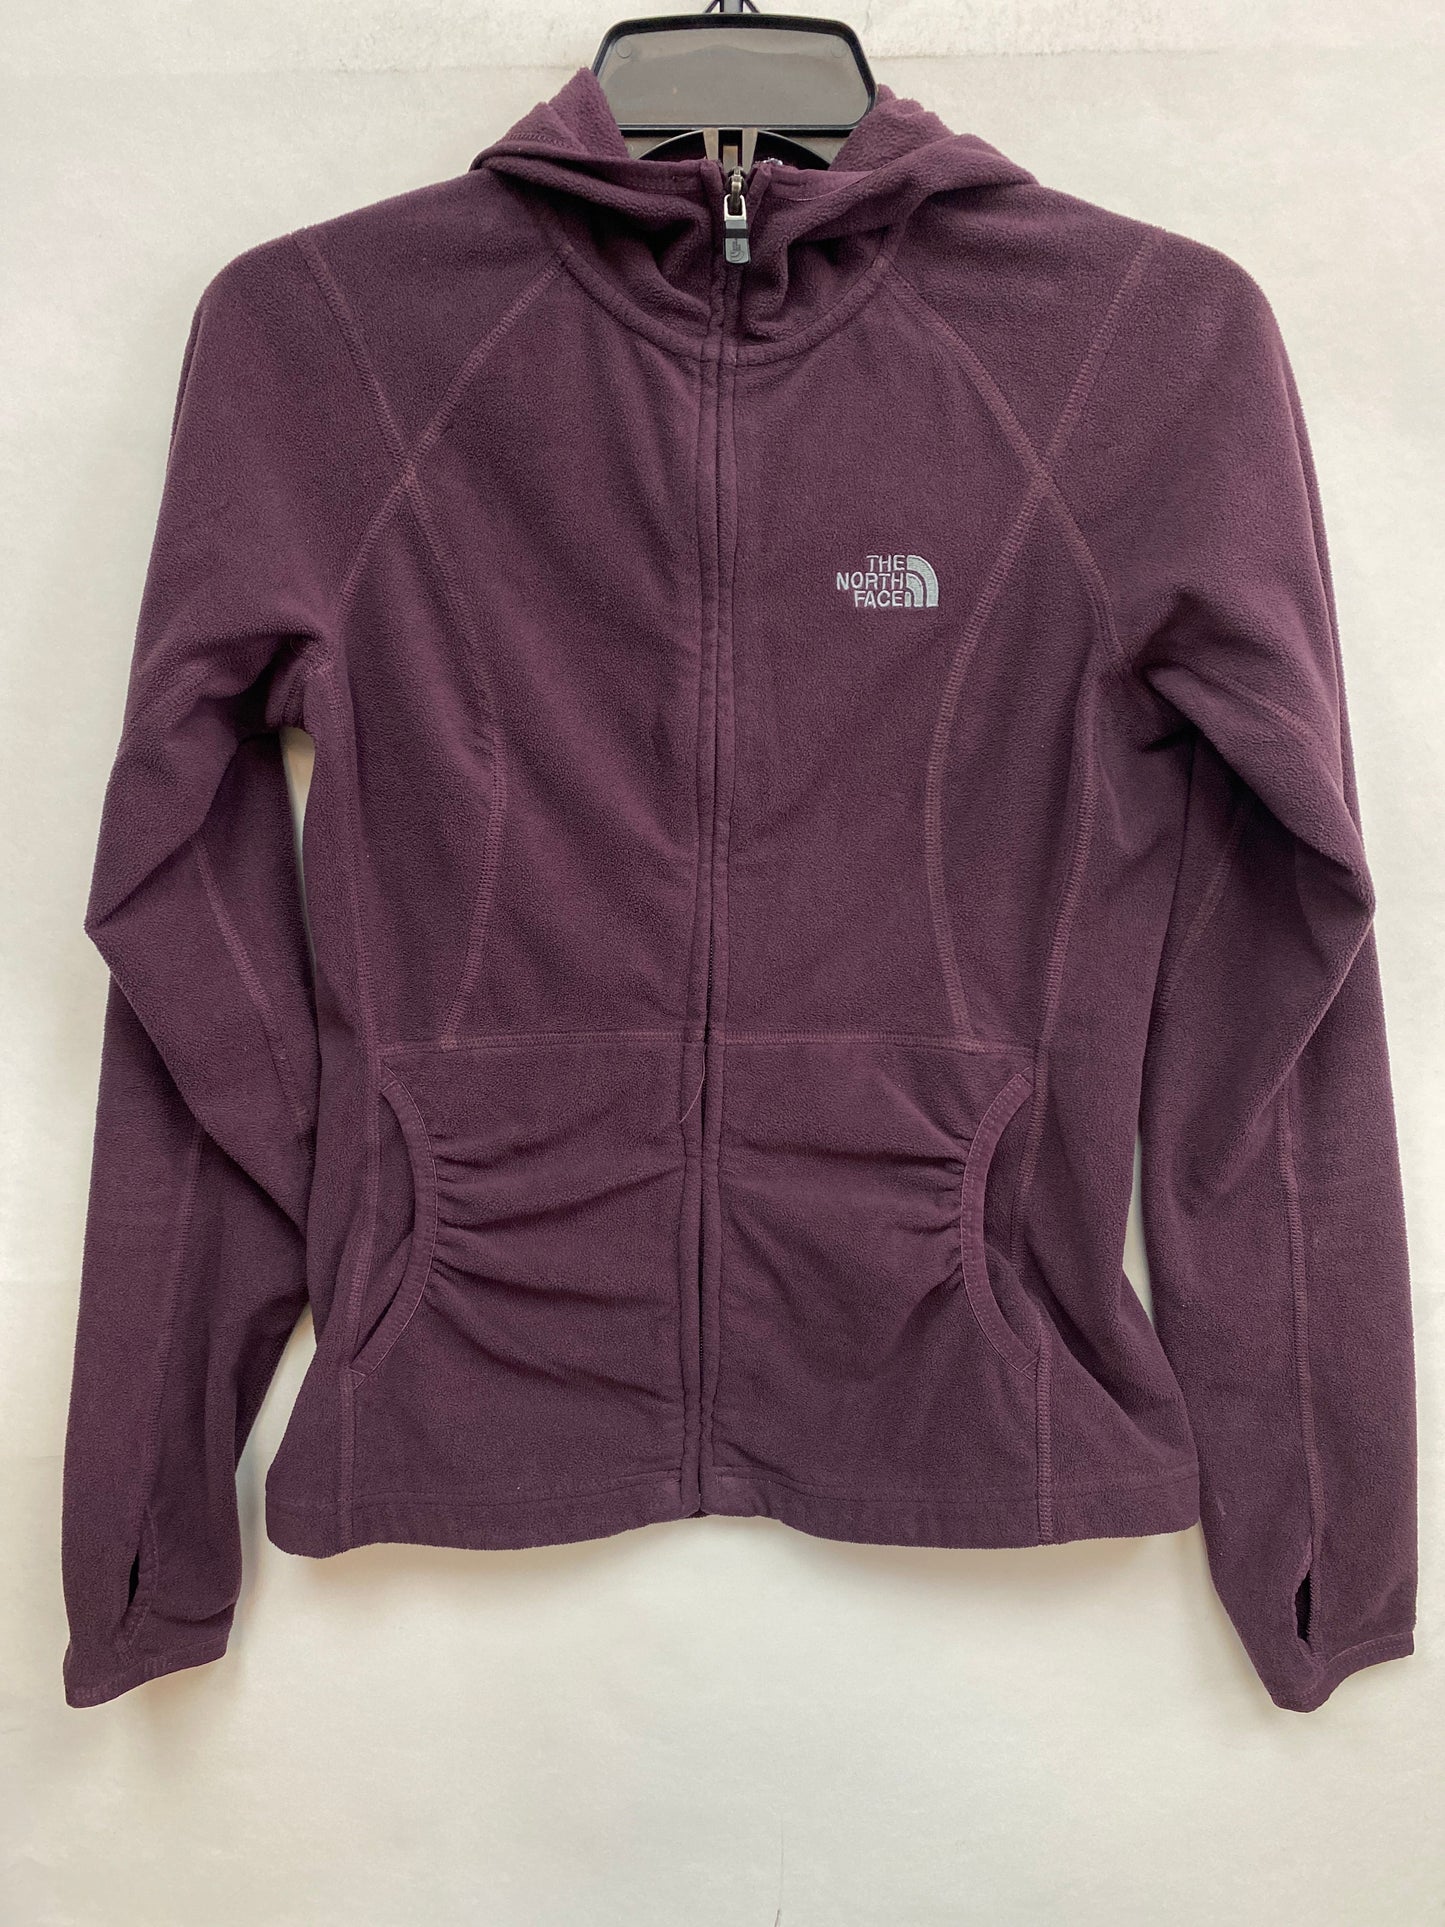 Athletic Fleece By North Face  Size: Xs